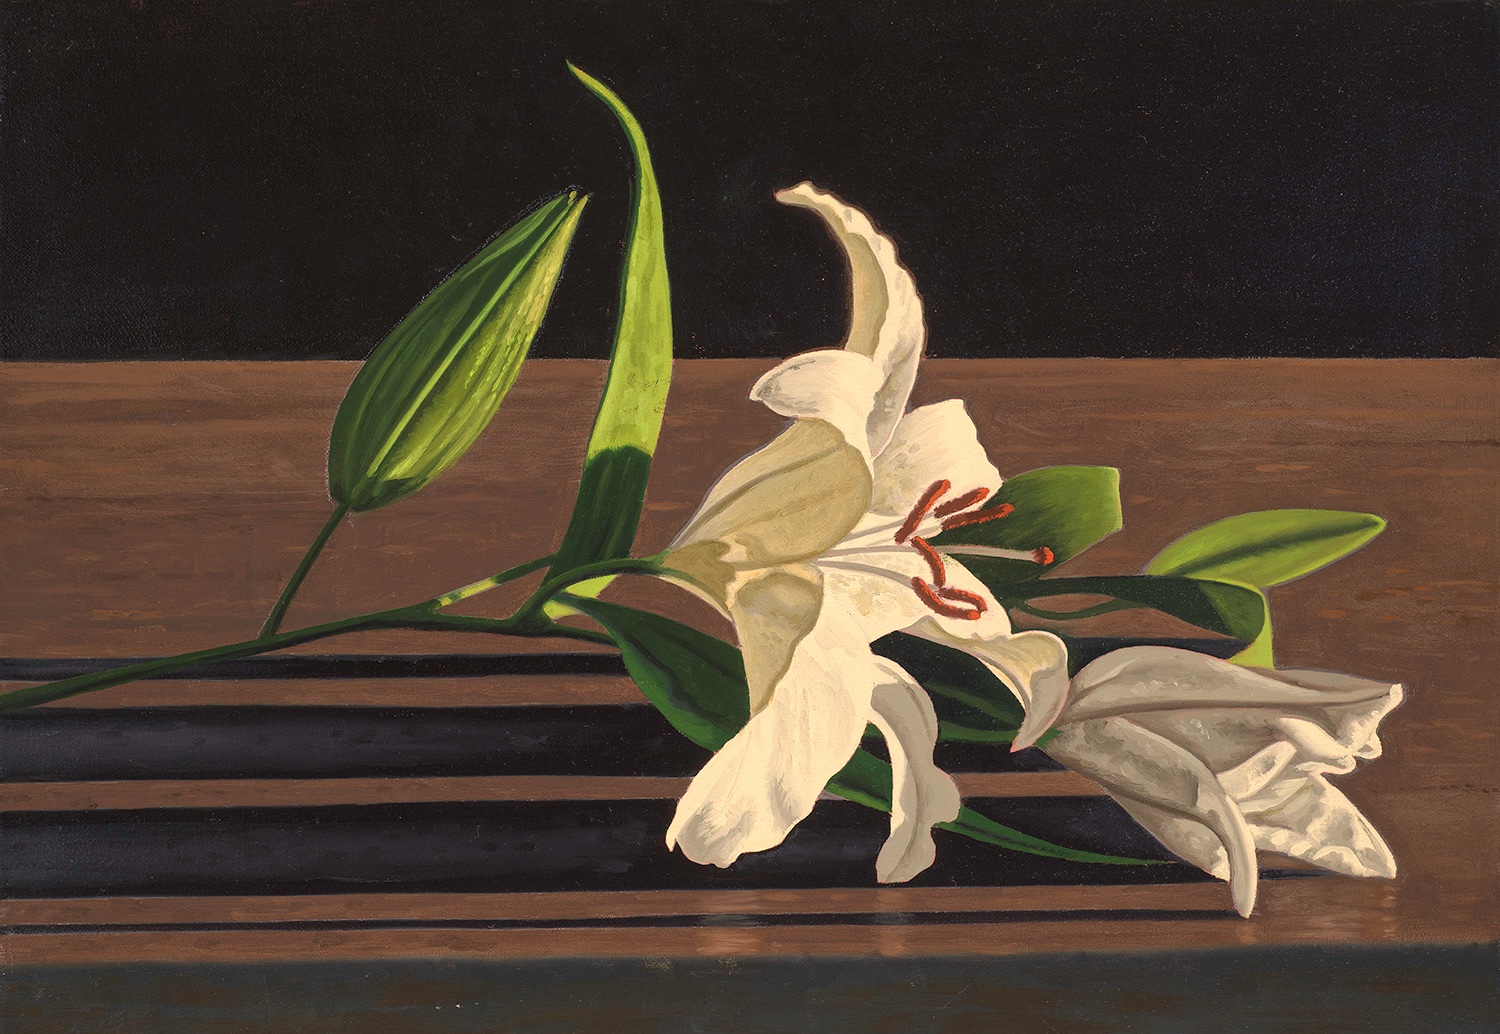 David Ligare (b. 1945), Still Life with Lilies, 2014